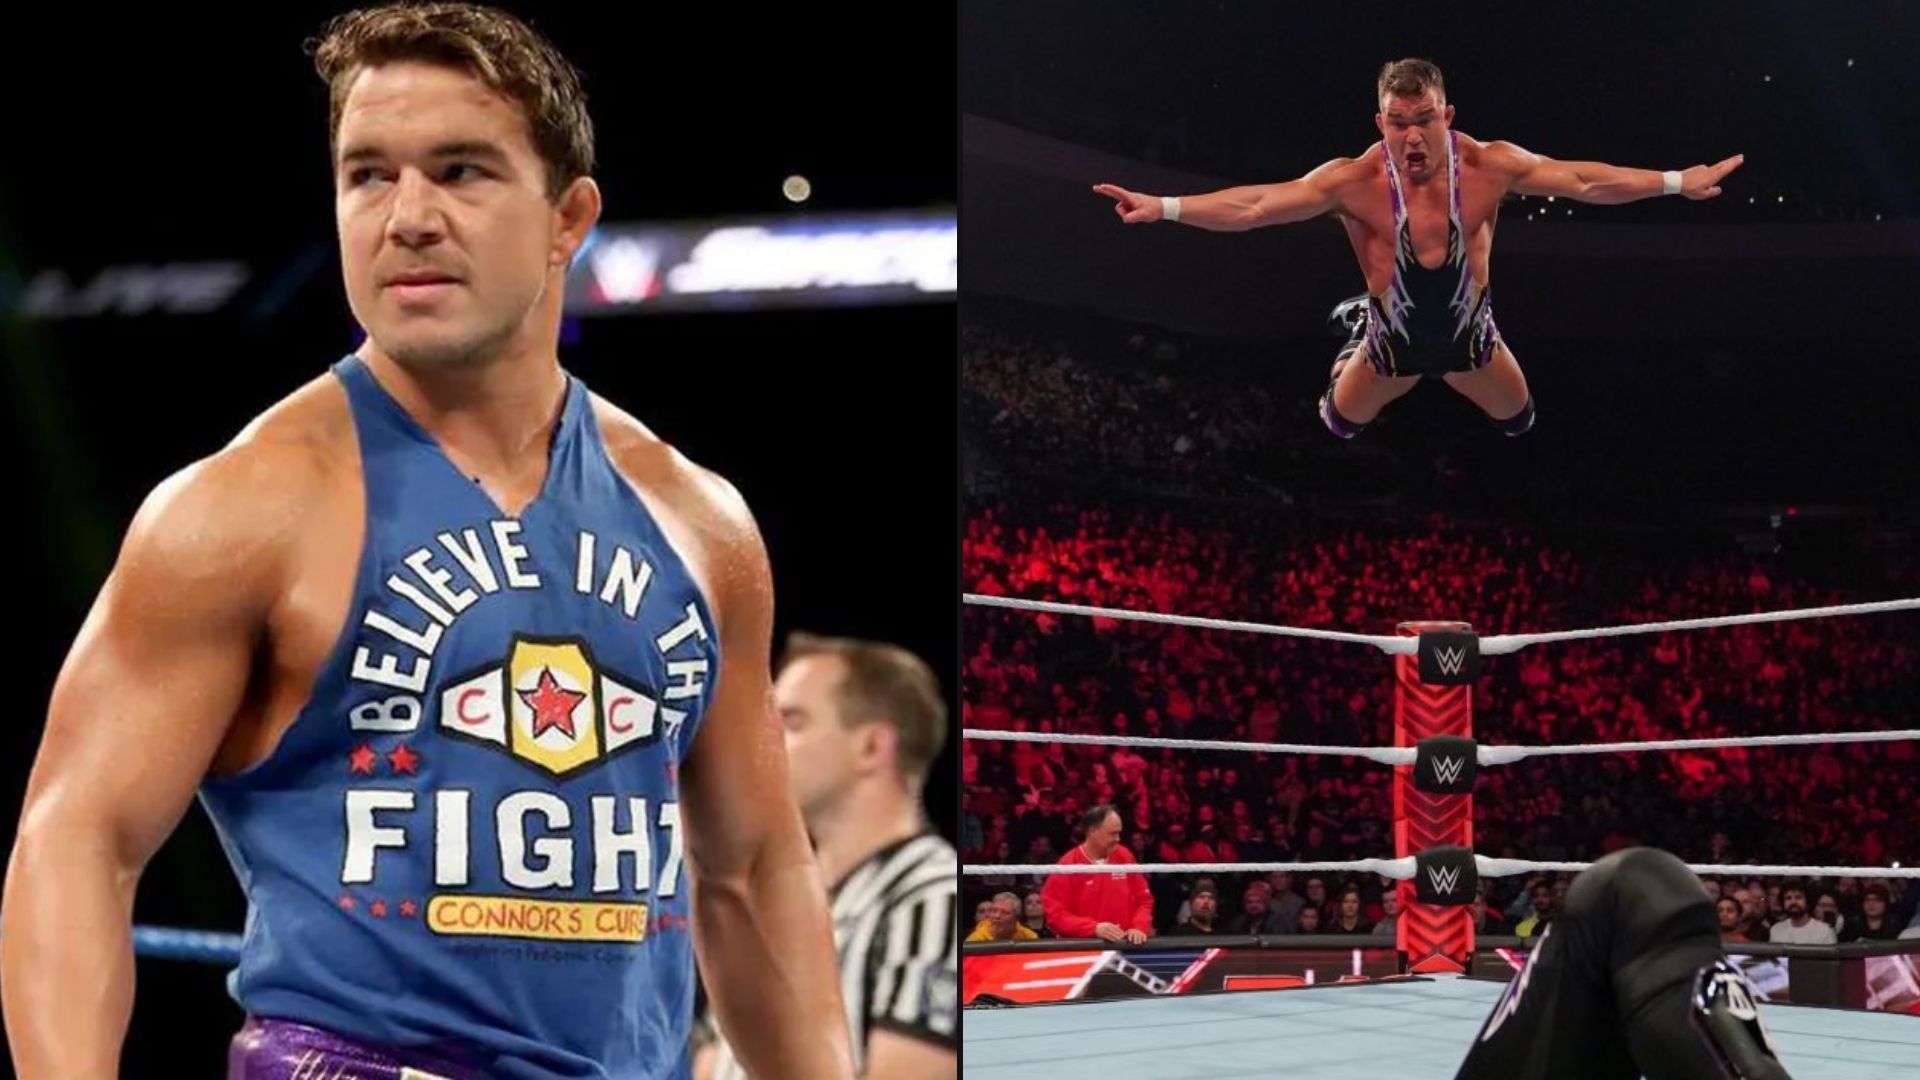 Chad Gable signed with WWE in 2015